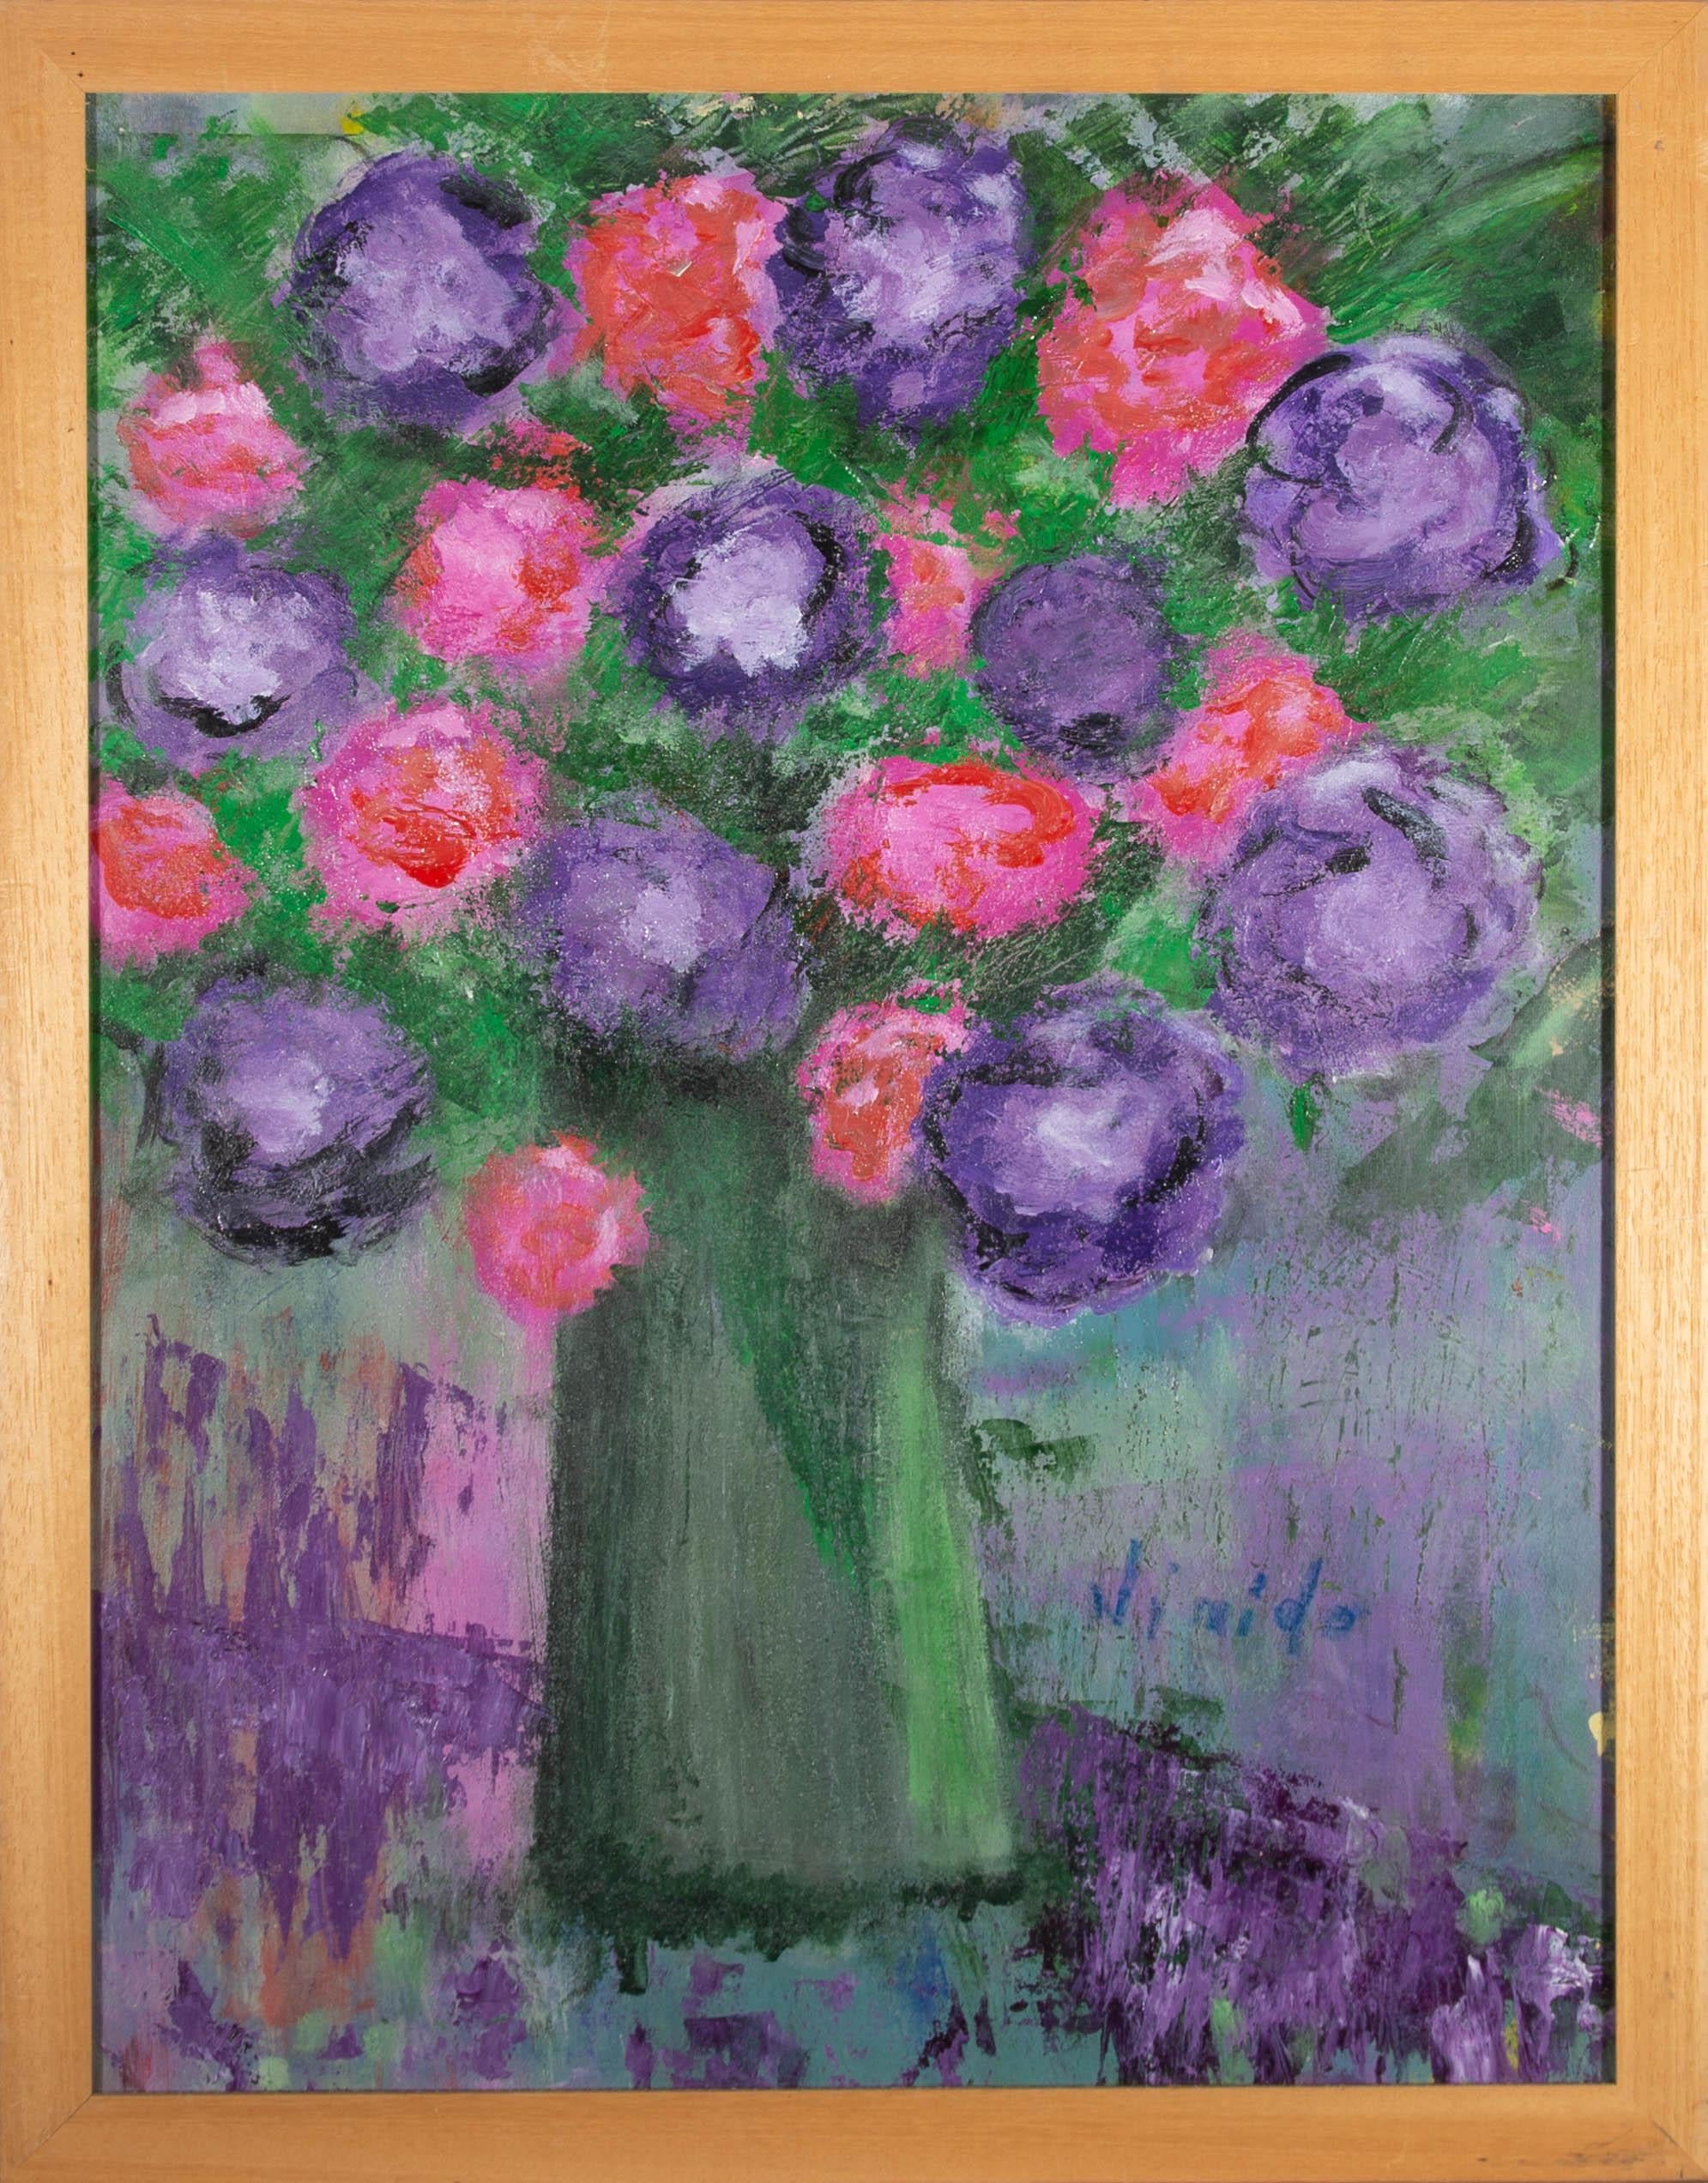 A captivating oil painting, depicting a still life of purple and pink flowers in a green vase. This painting is by Mde Deleuze, under a project of the Valetudo Association. Created in 1995 and coordinated since by doctor Jean-Marc Boulon, the